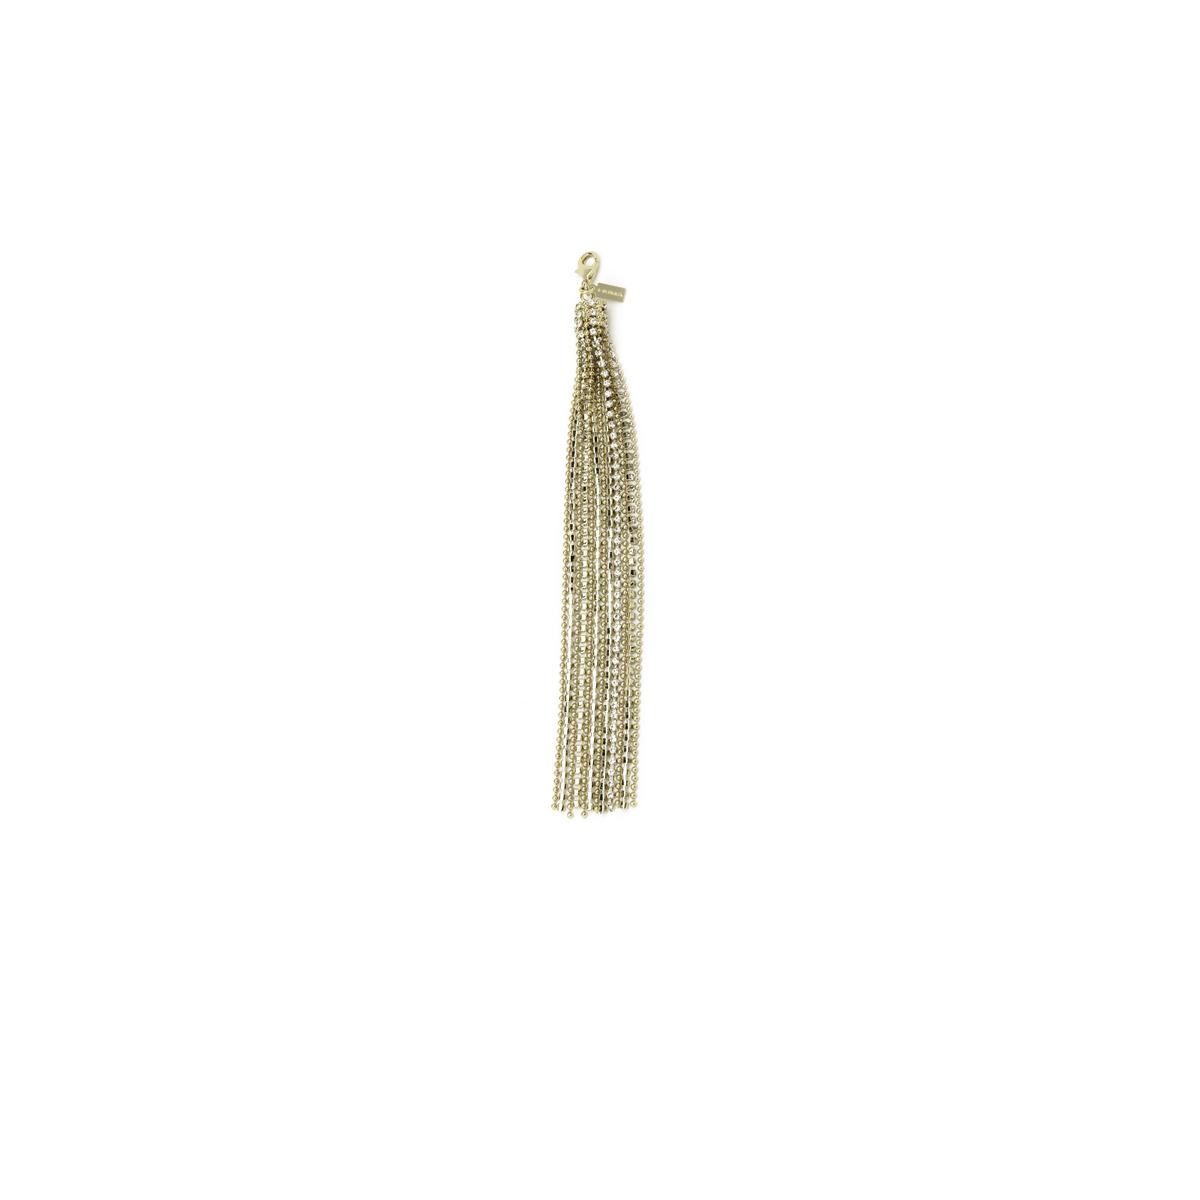 Huma CRYSTAL FRINGES EARRING E18 Gold & Crystals E18 Gold & Crystals - 3/3